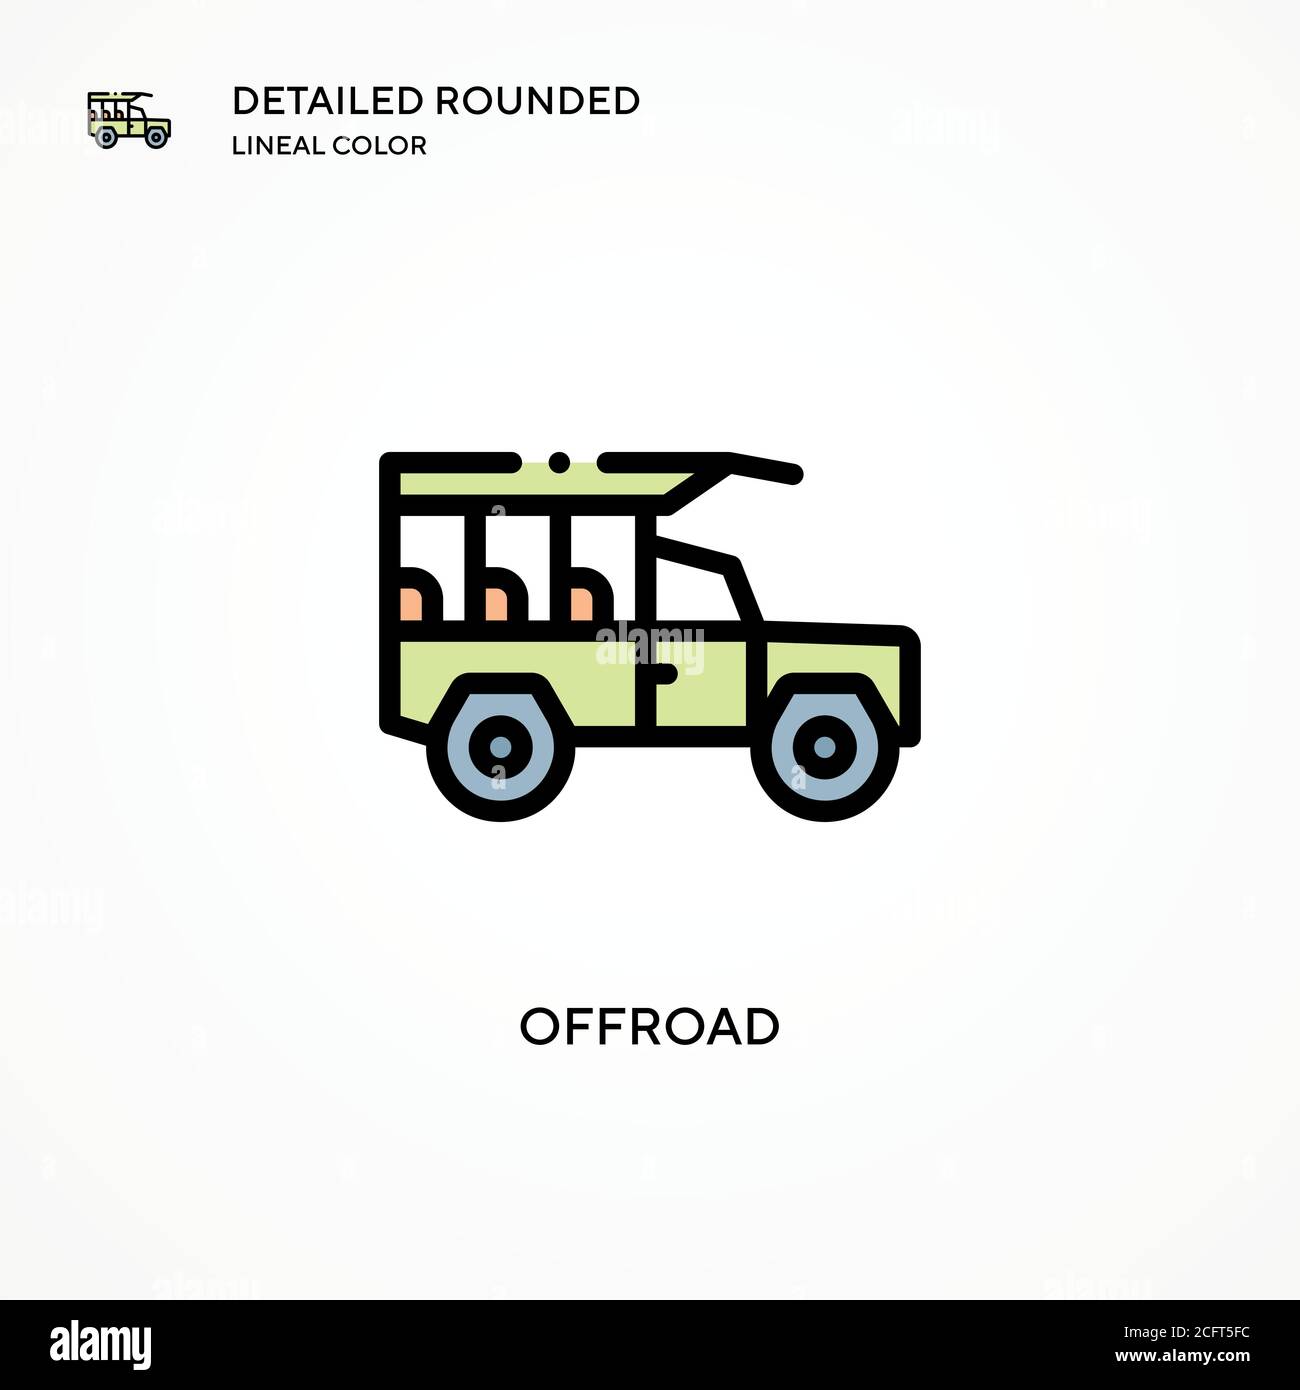 Offroad vector icon. Modern vector illustration concepts. Easy to edit and customize. Stock Vector